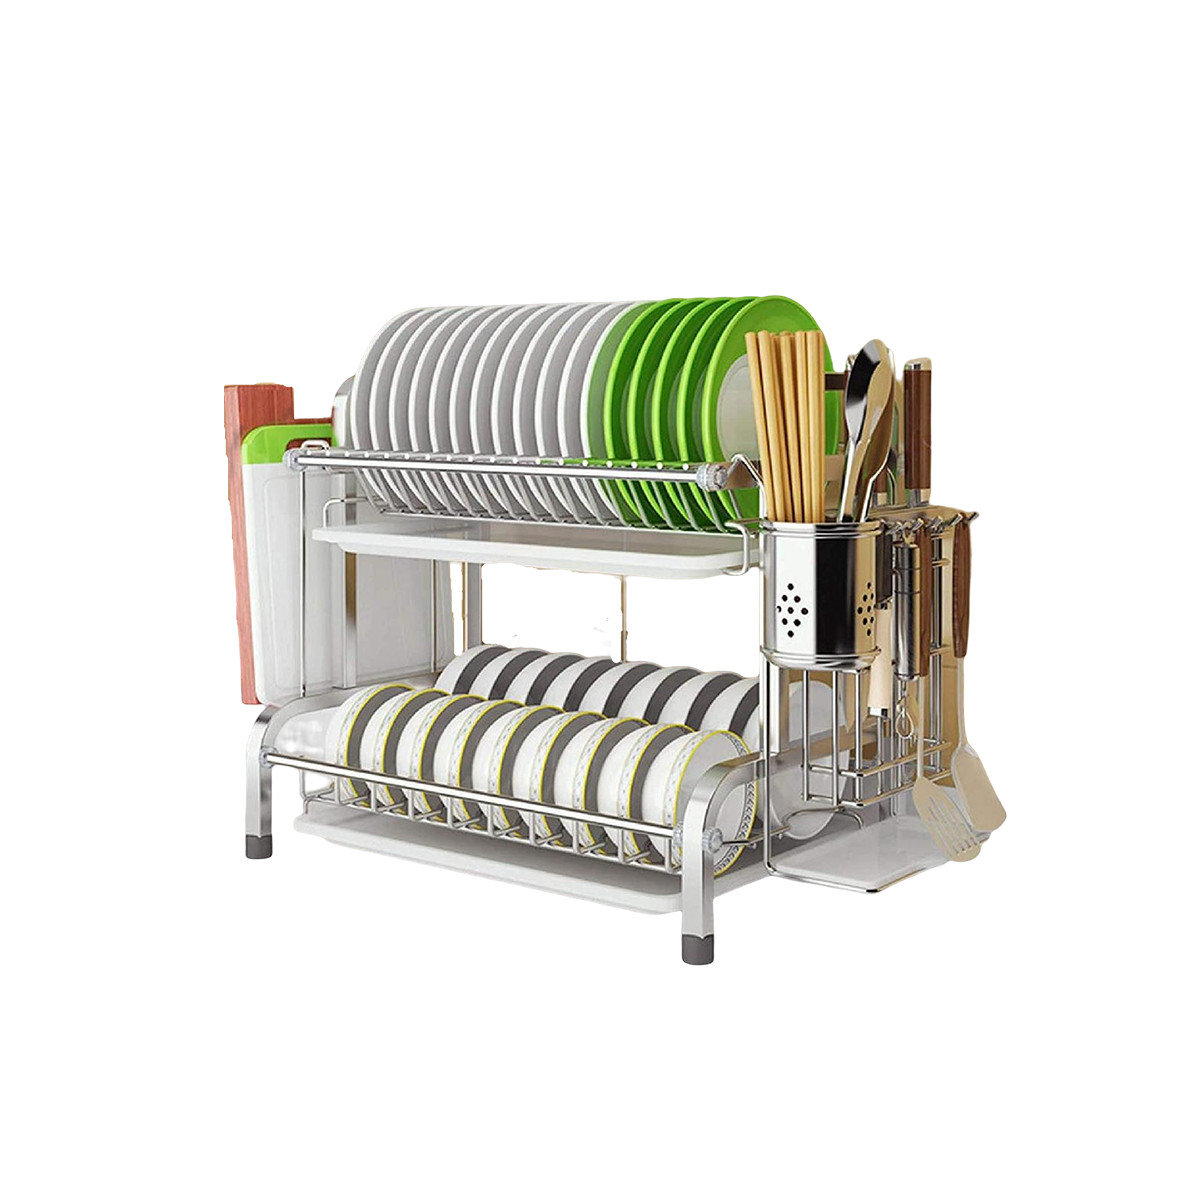 ZHILAI TENGSHUN TRADING INC Extra Large Stainless Steel Over the Sink Dish  Rack